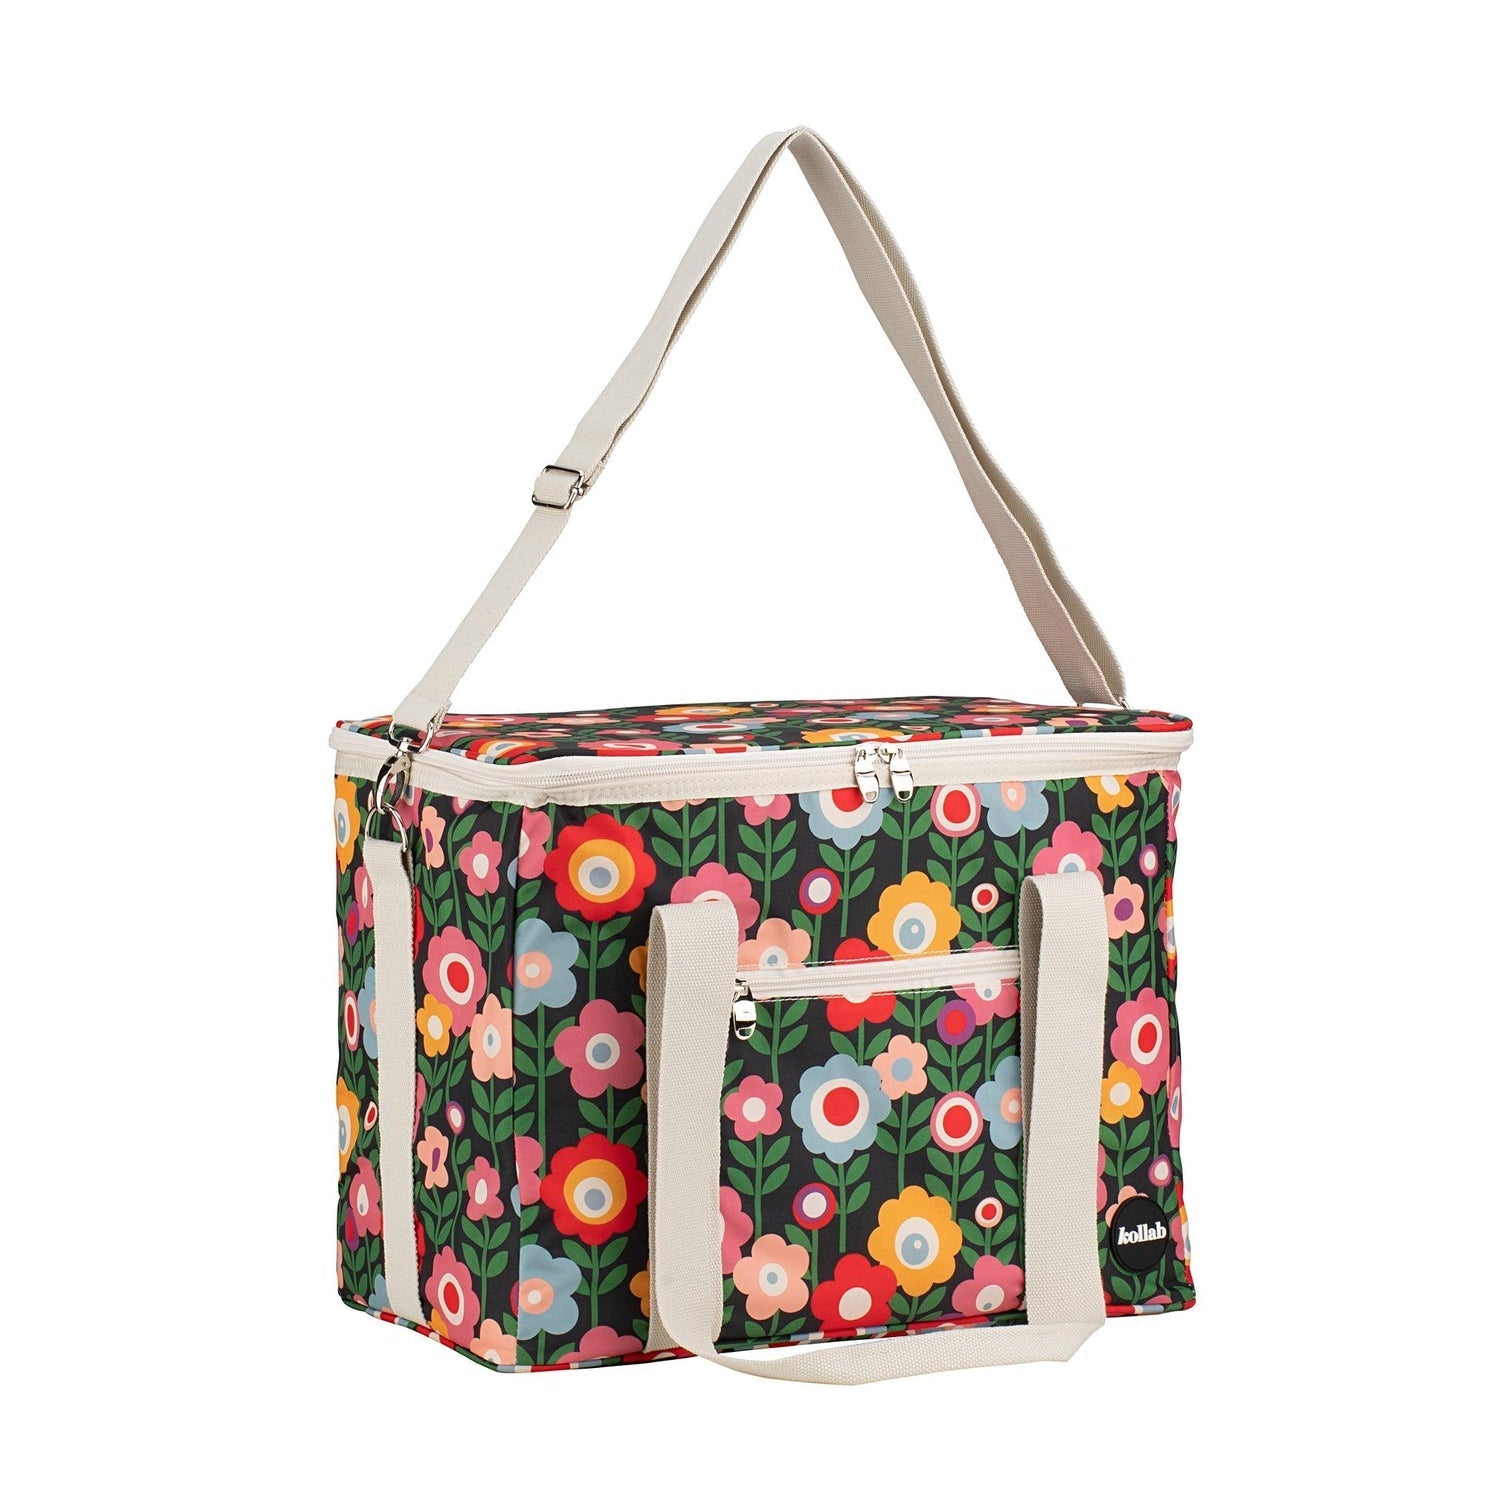 Picnic Bag Marguerite-Travel & Outdoors-Kollab-The Bay Room